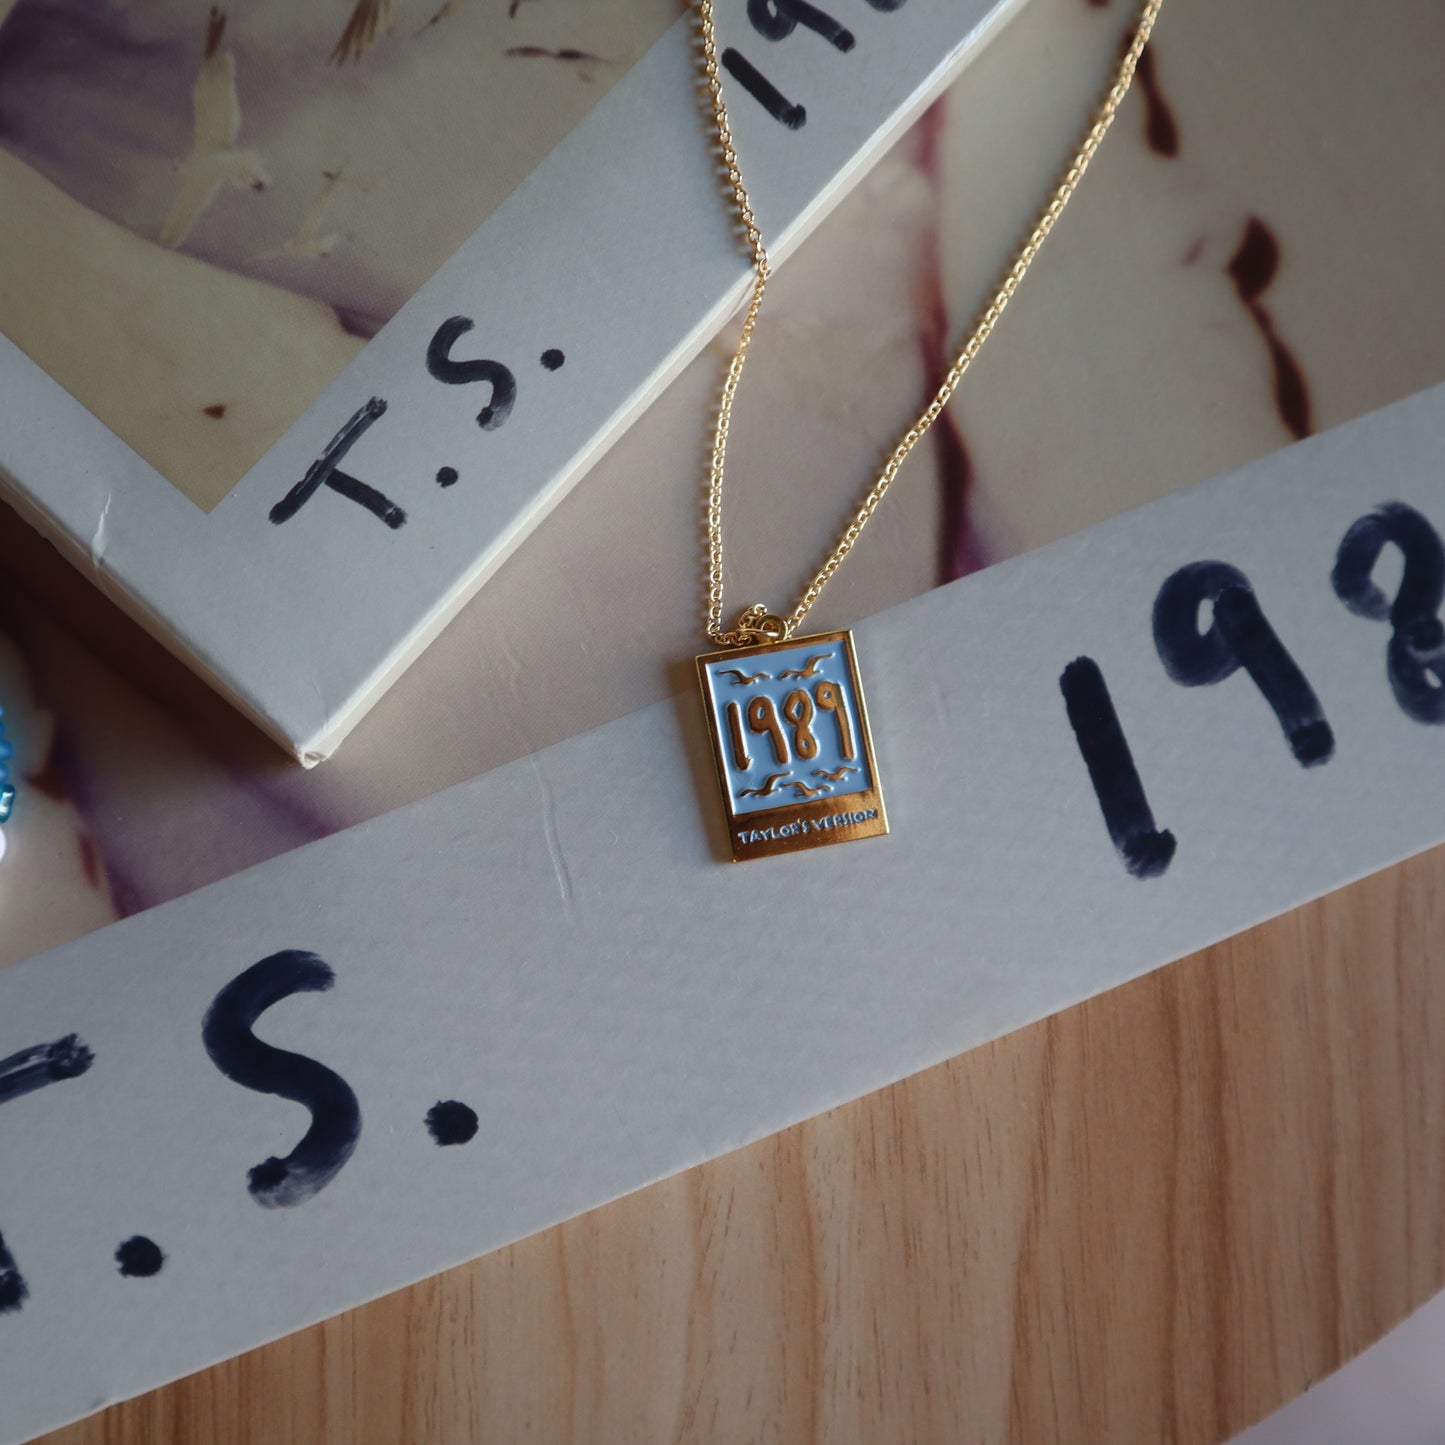 Gold 1989 Necklace